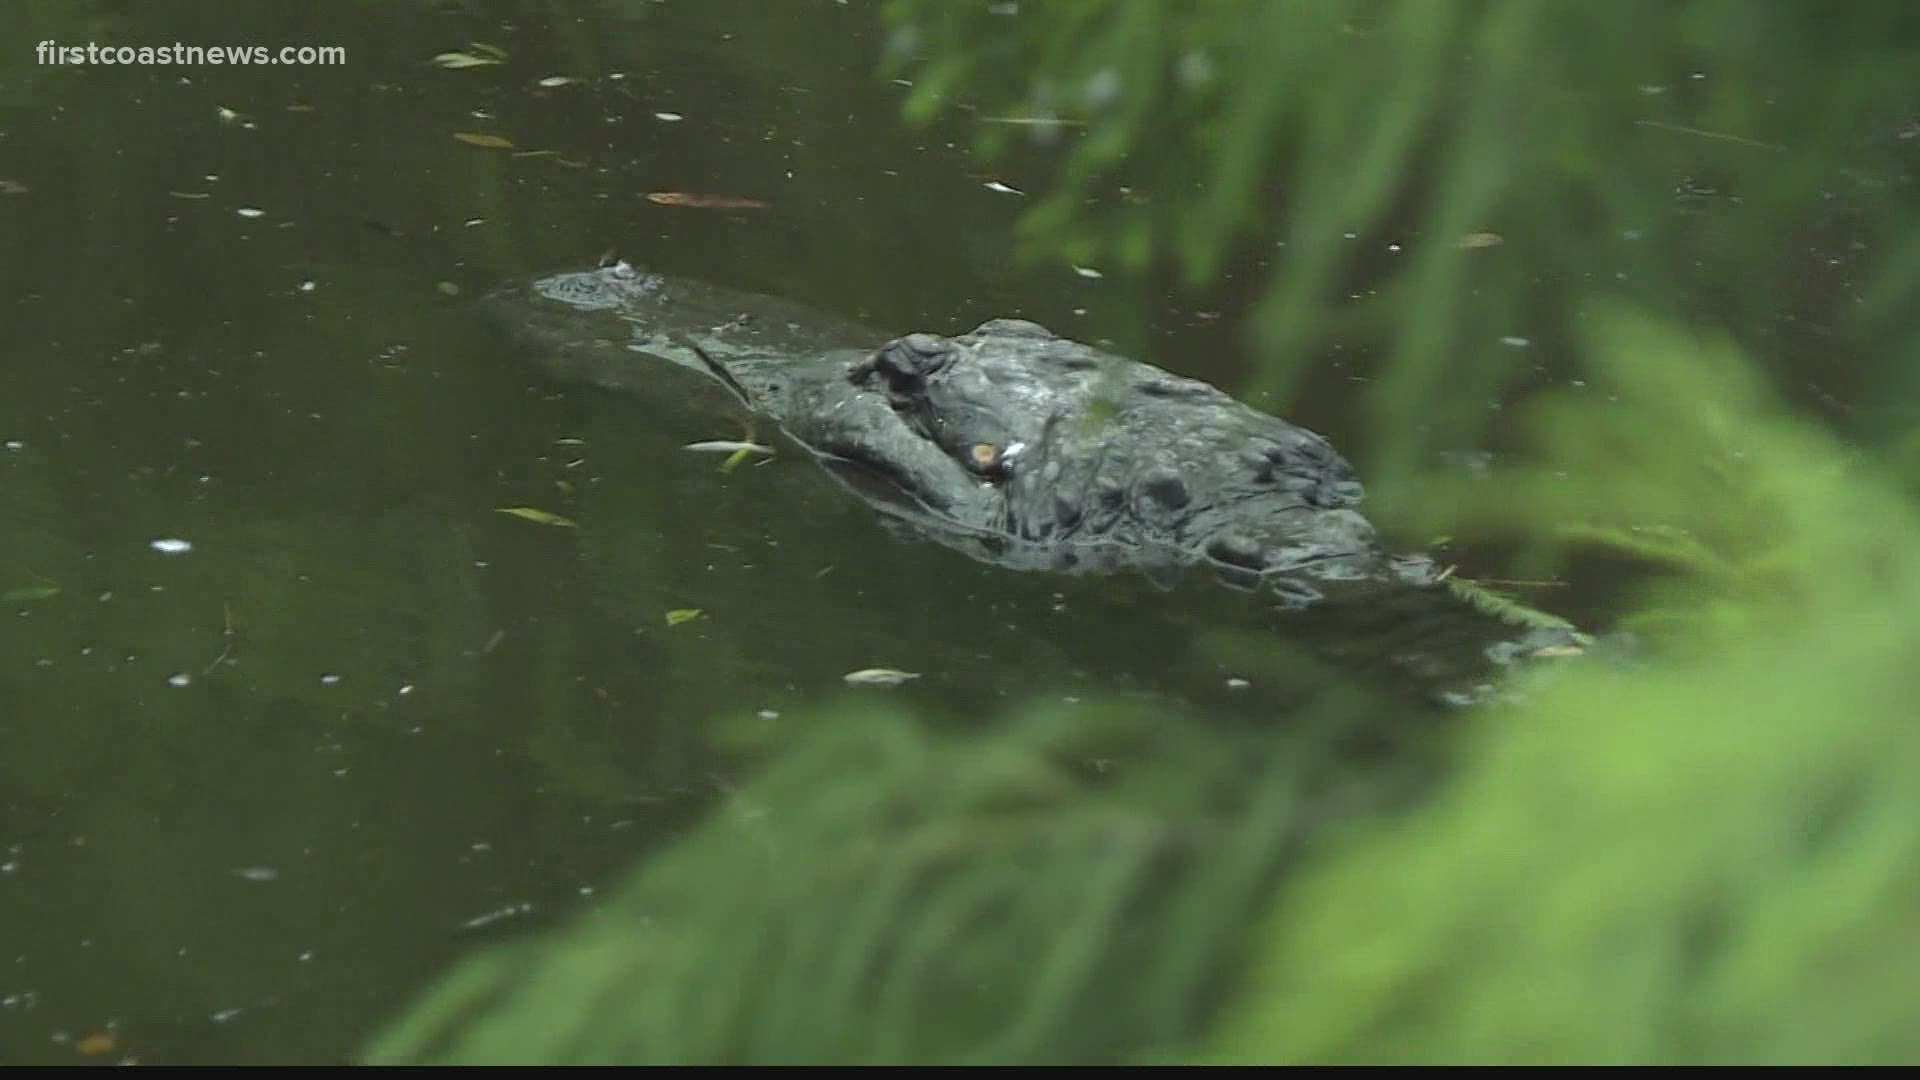 Exclusive interview with the Reptiles Curator at the St. Augustine Alligator Farm. He described his experience when a gator attacked him Saturday at the park.